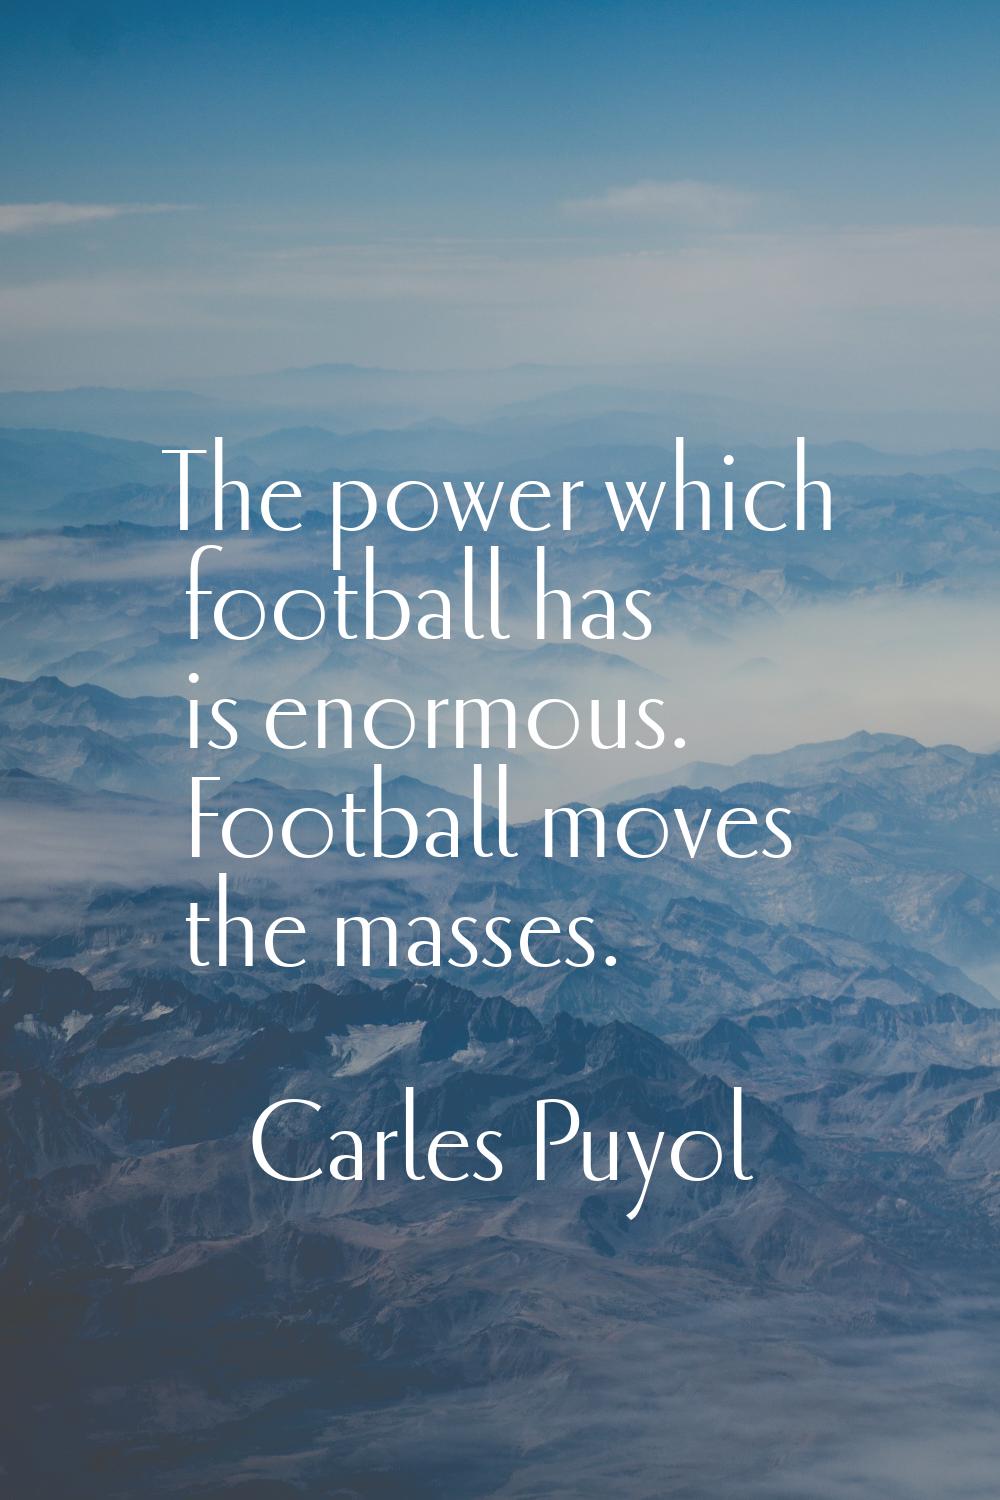 The power which football has is enormous. Football moves the masses.